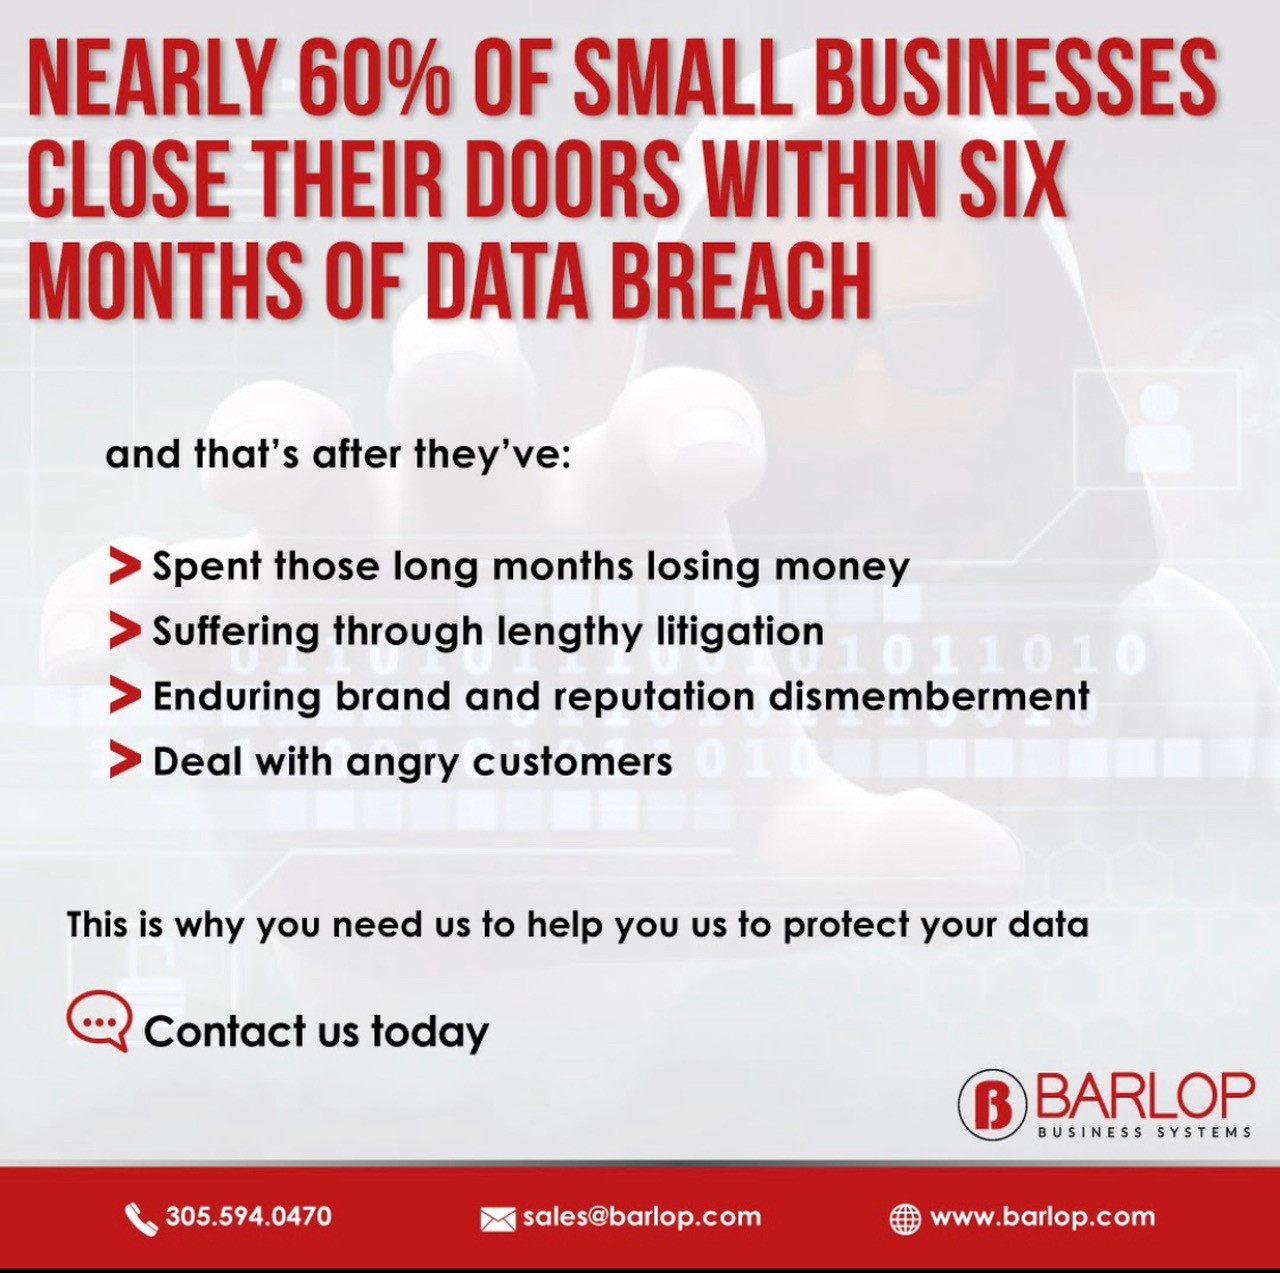 Barlop Protects Customers: Password Management & Managed IT